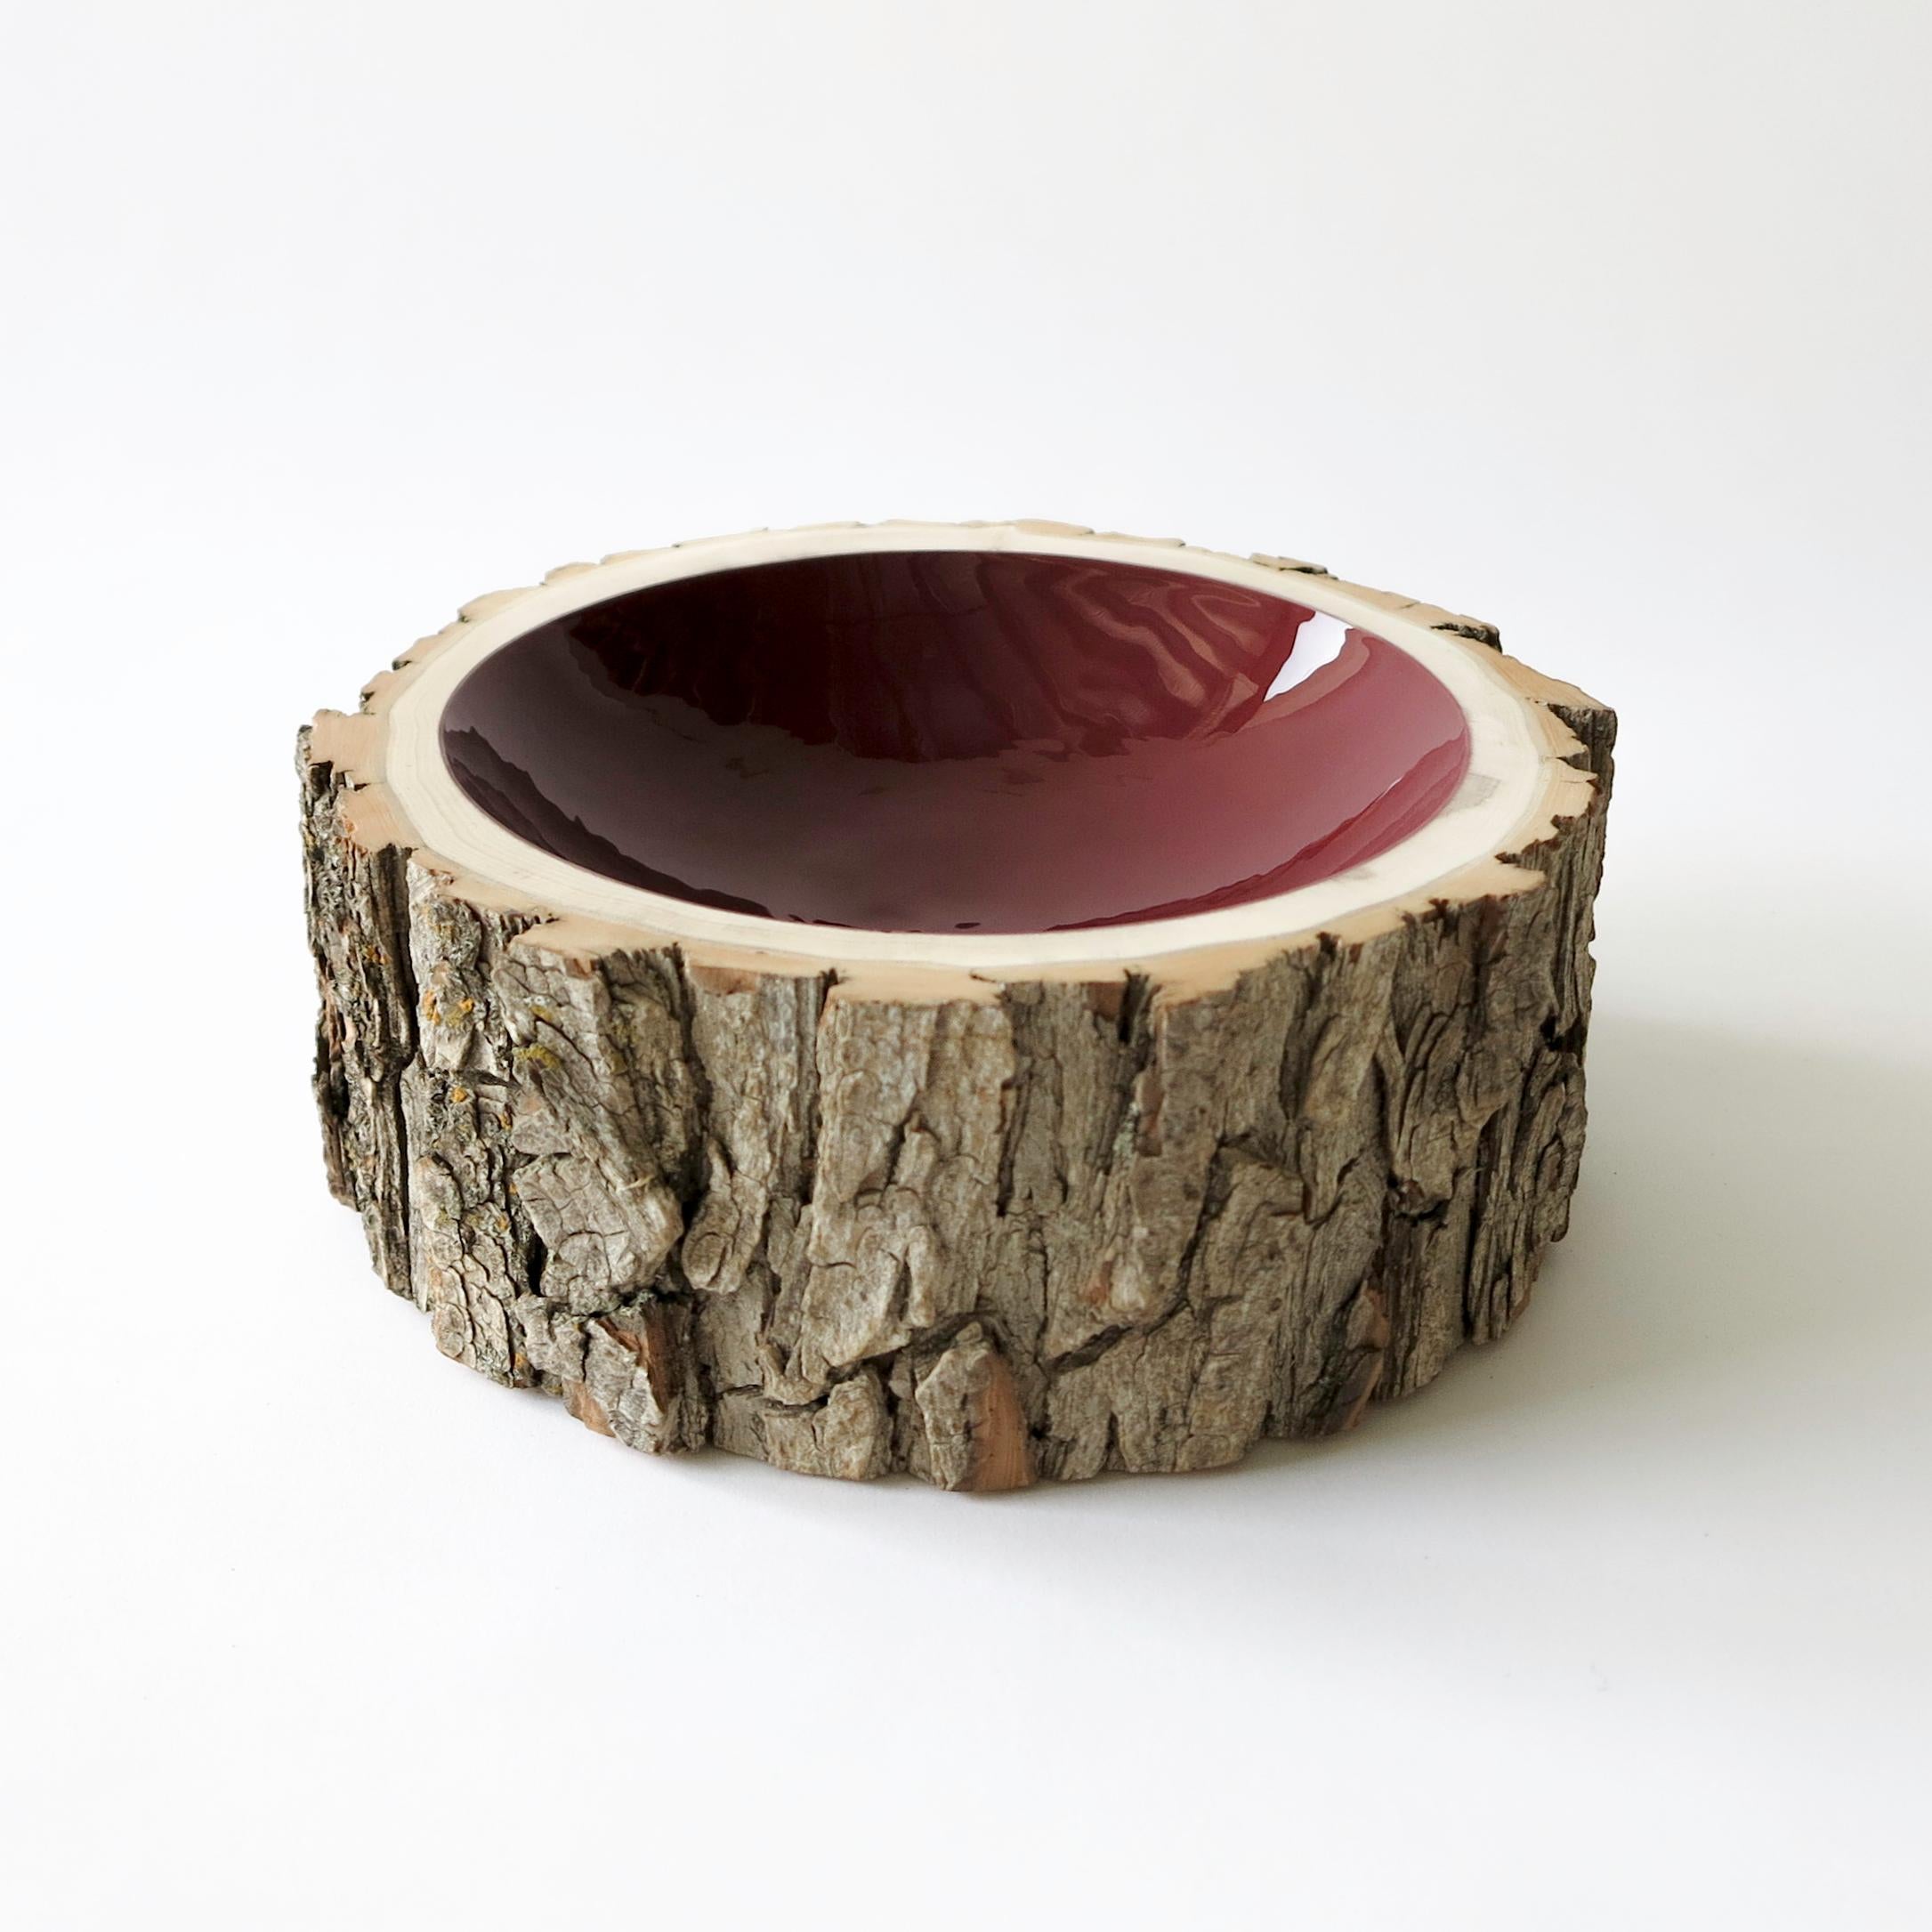 Perfect as a feature objet d'art on your table or shelves, a catch-all for jewellery and special items, or displayed as a group for a striking centrepiece. 
Each Log Bowl is unique and makes the perfect one of a kind gift.

Log Bowls combine the